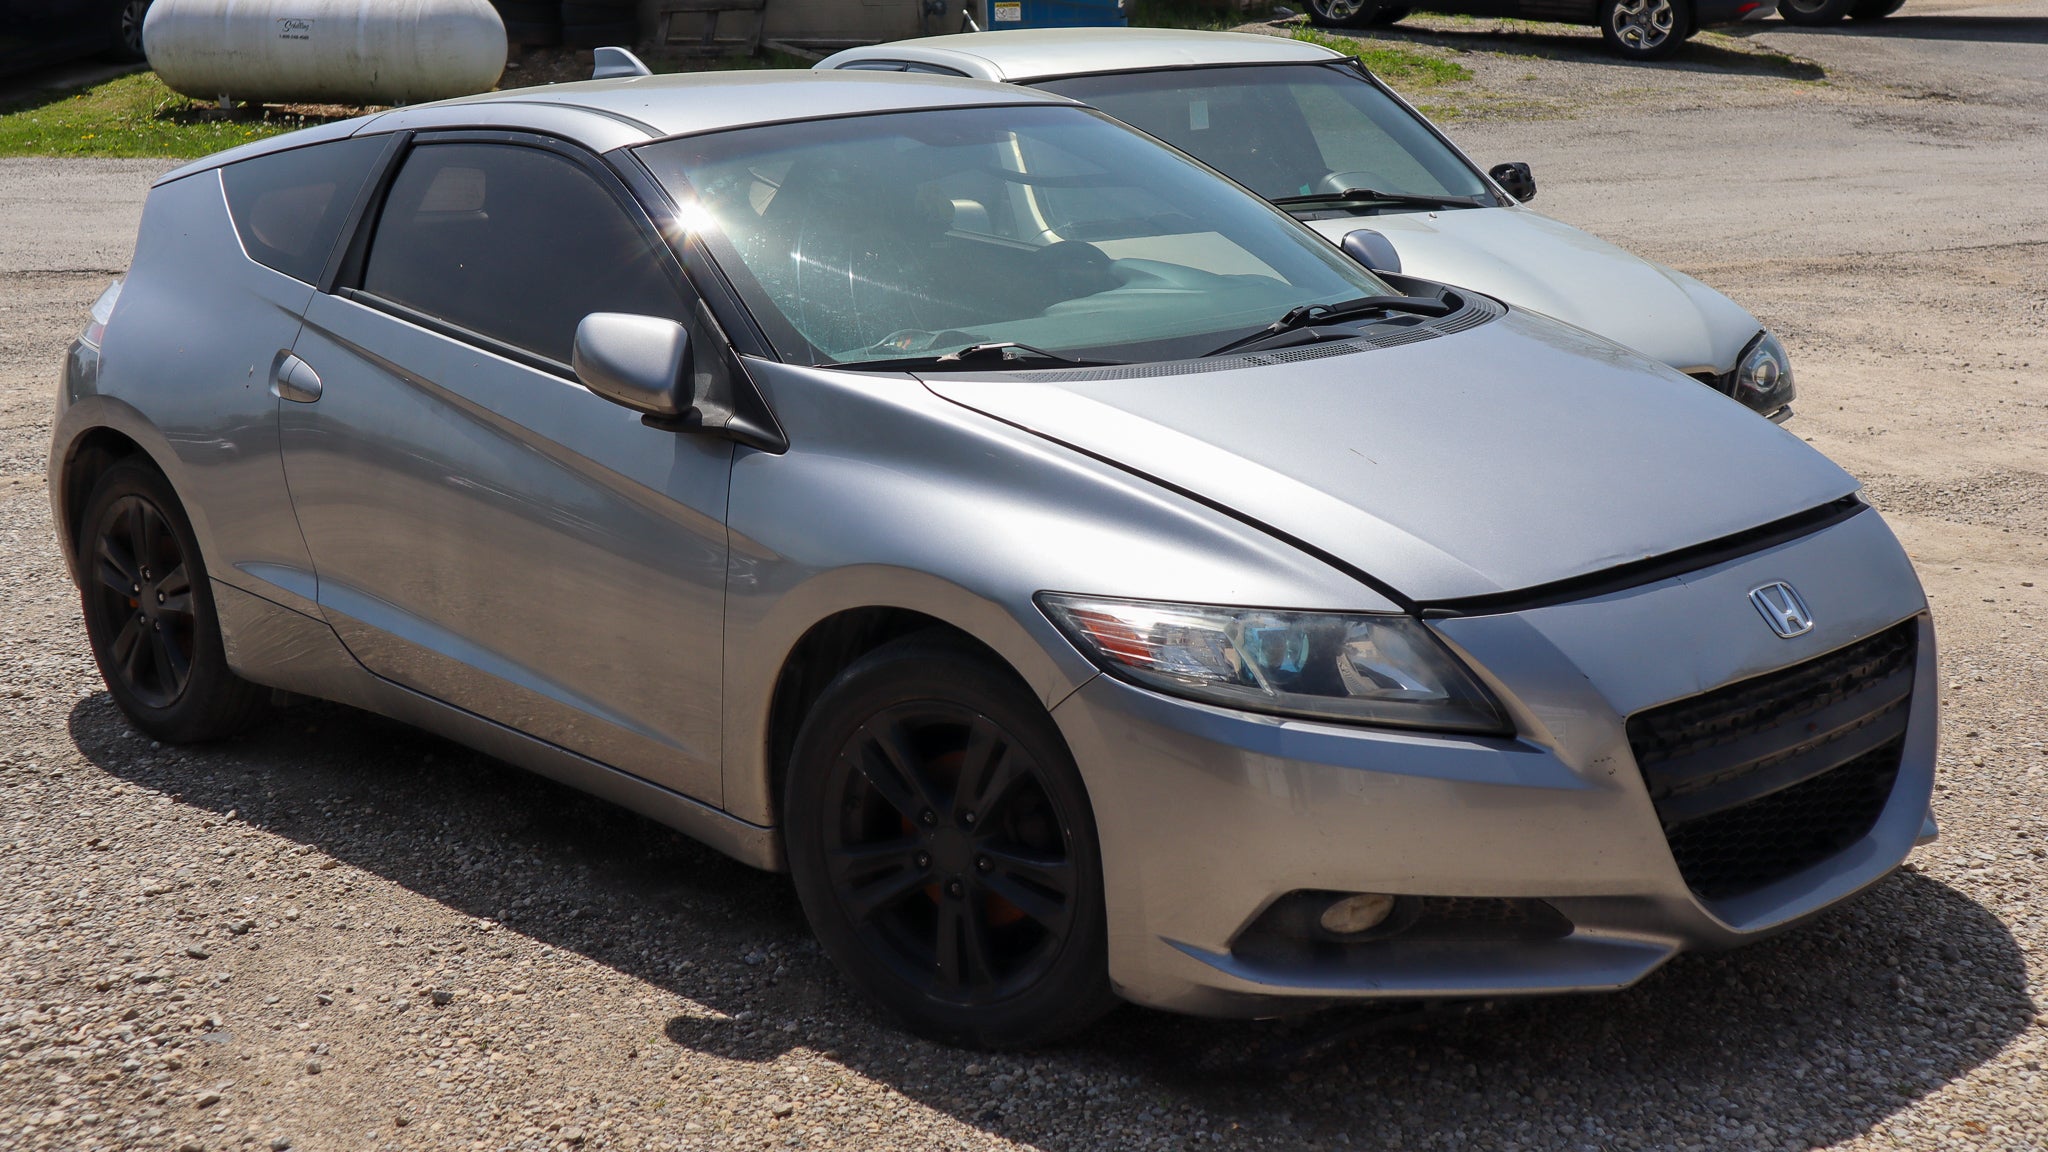 Botched Aftermarket Wiring Is Making My Honda CR-Z Project a Nightmare